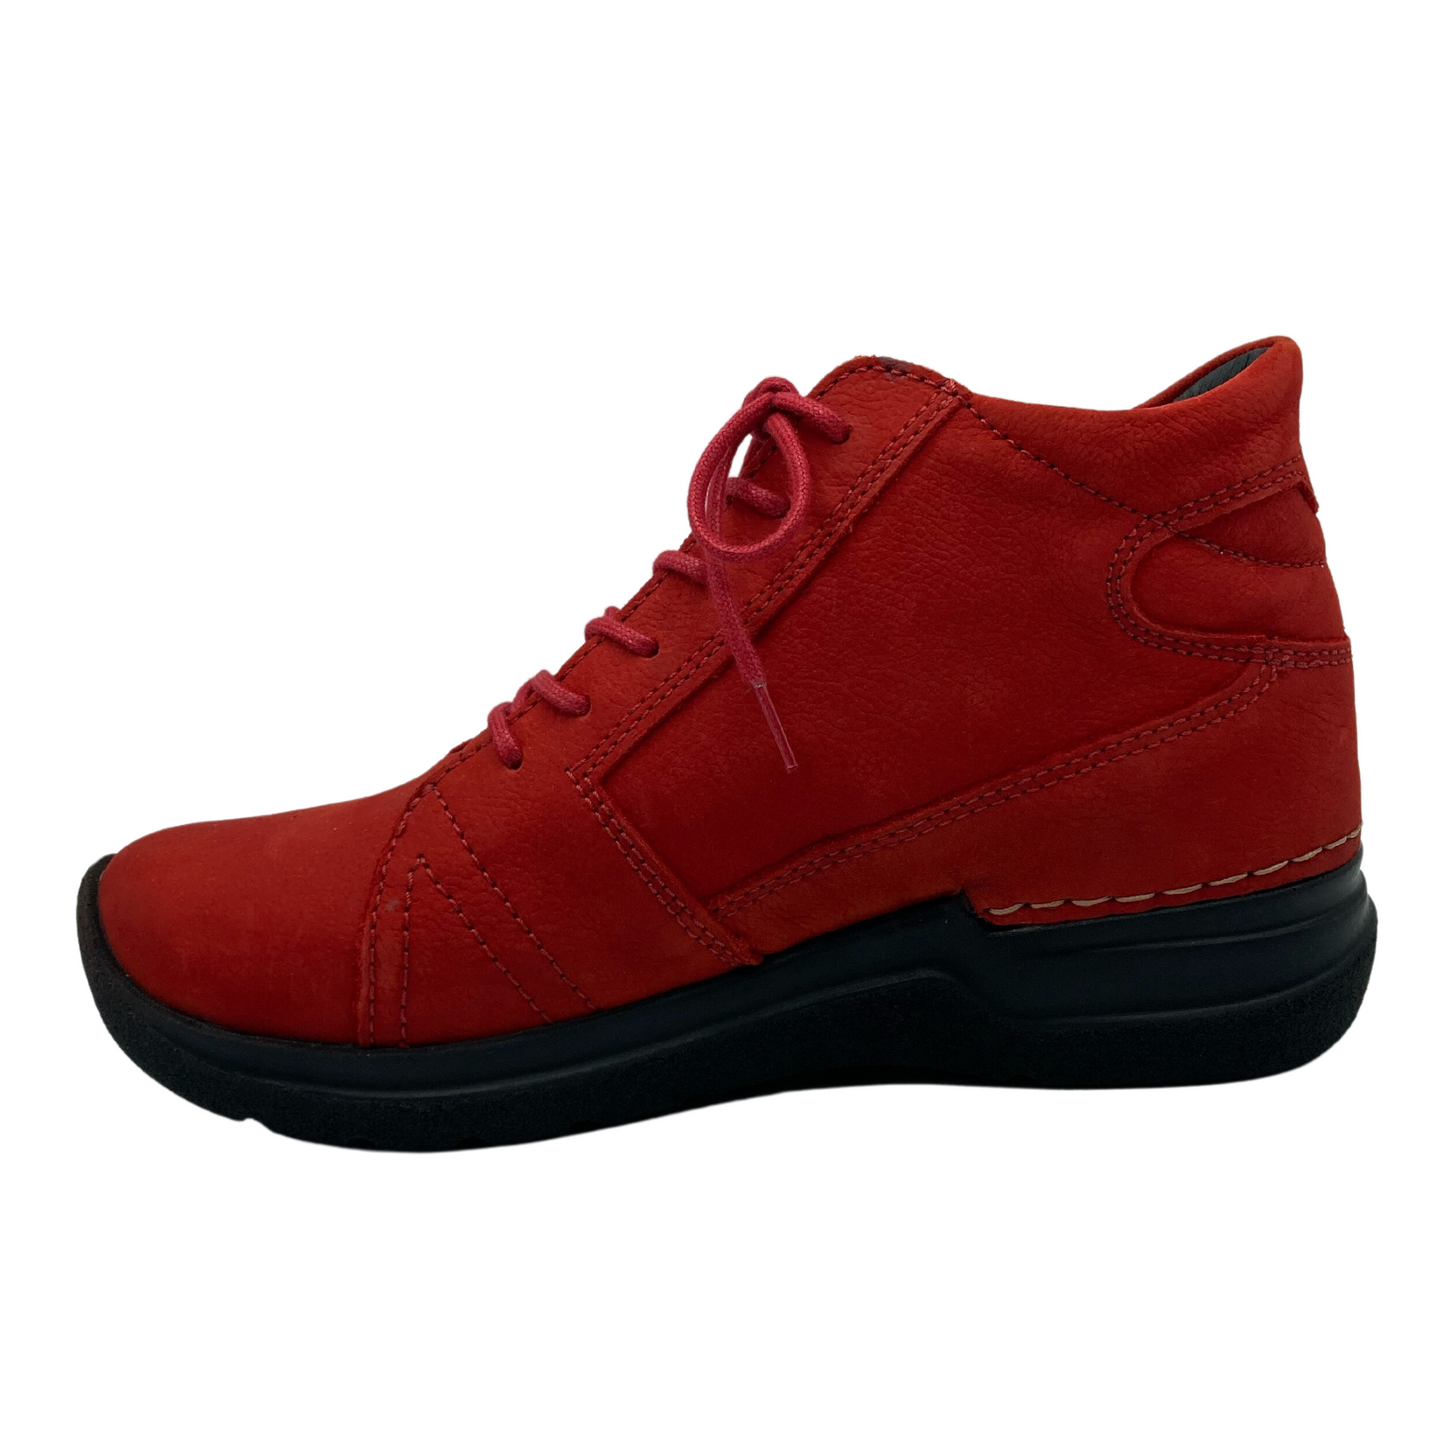 Left facing view of red leather bootie walking shoe with red laces and black rubber outsole